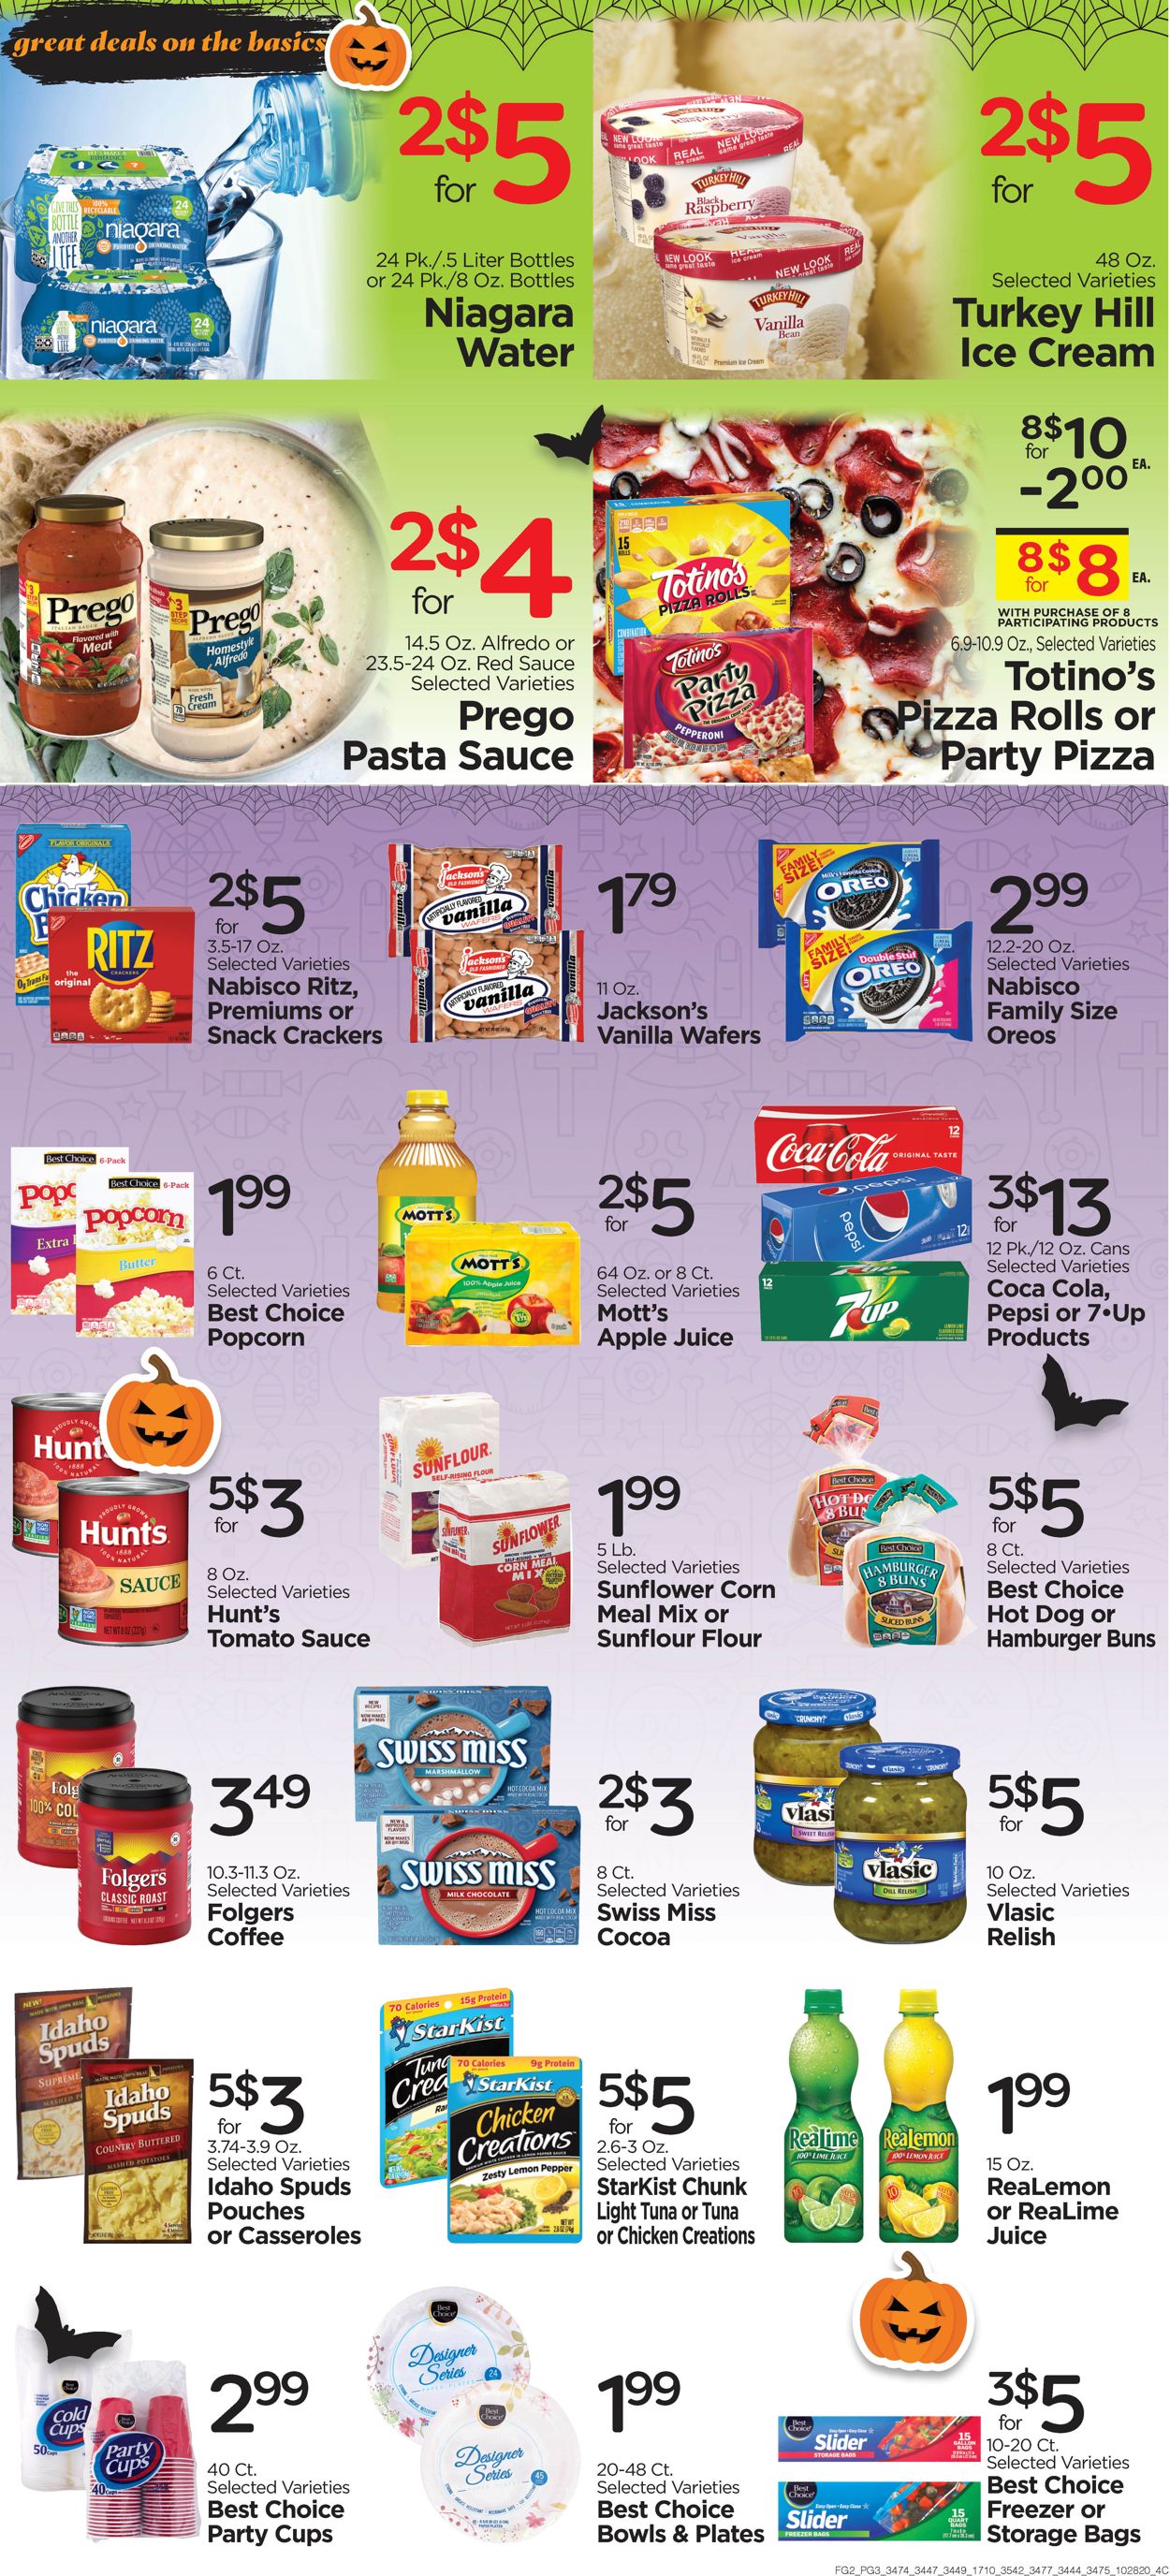 Edwards Food Giant Ad from 10/28/2020